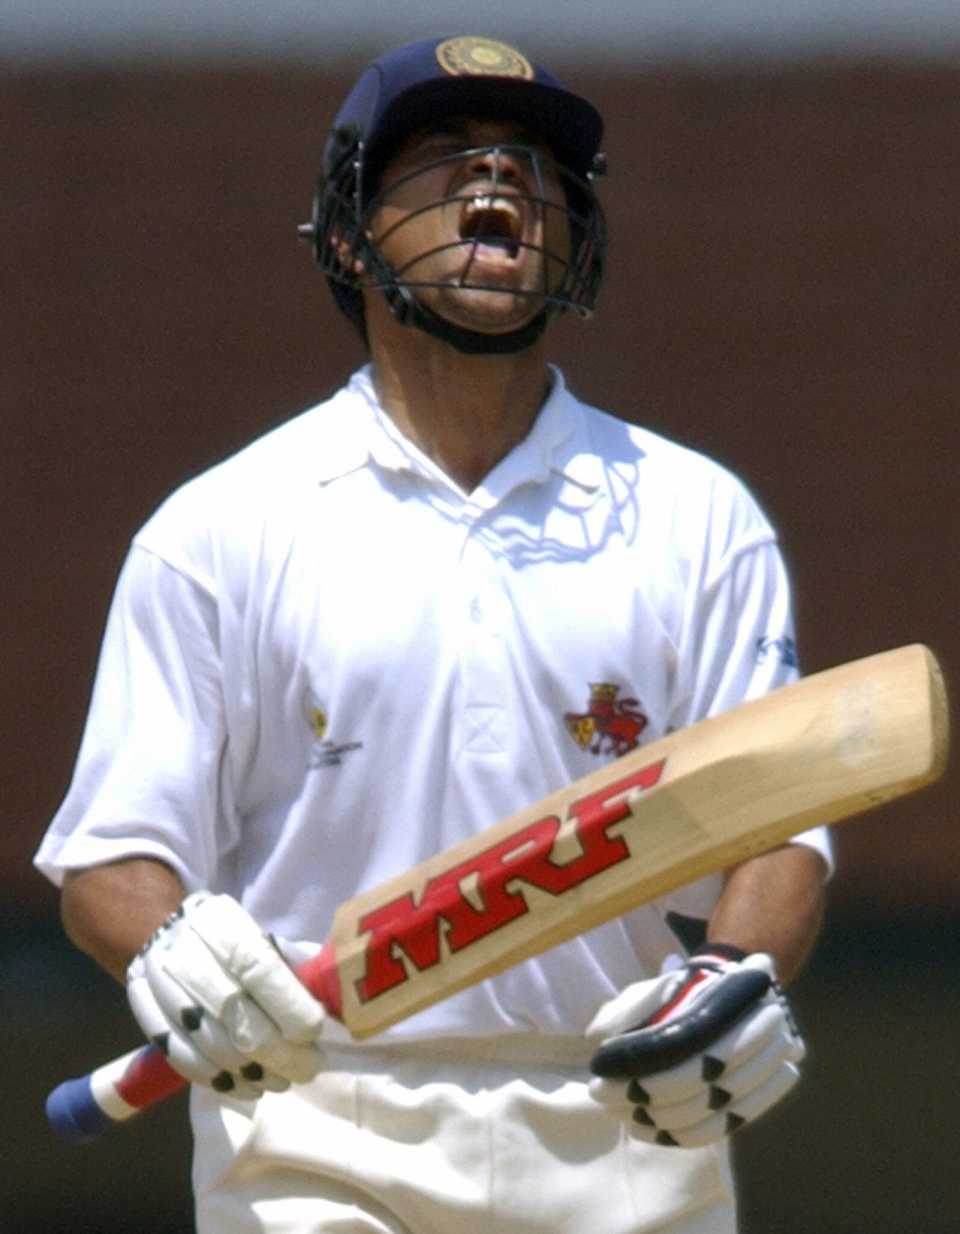 Sachin Tendulkar is disappointed to be dismissed for 50, Mumbai v Rest of India, Irani Trophy, 3rd day, Chennai, September 20, 2003